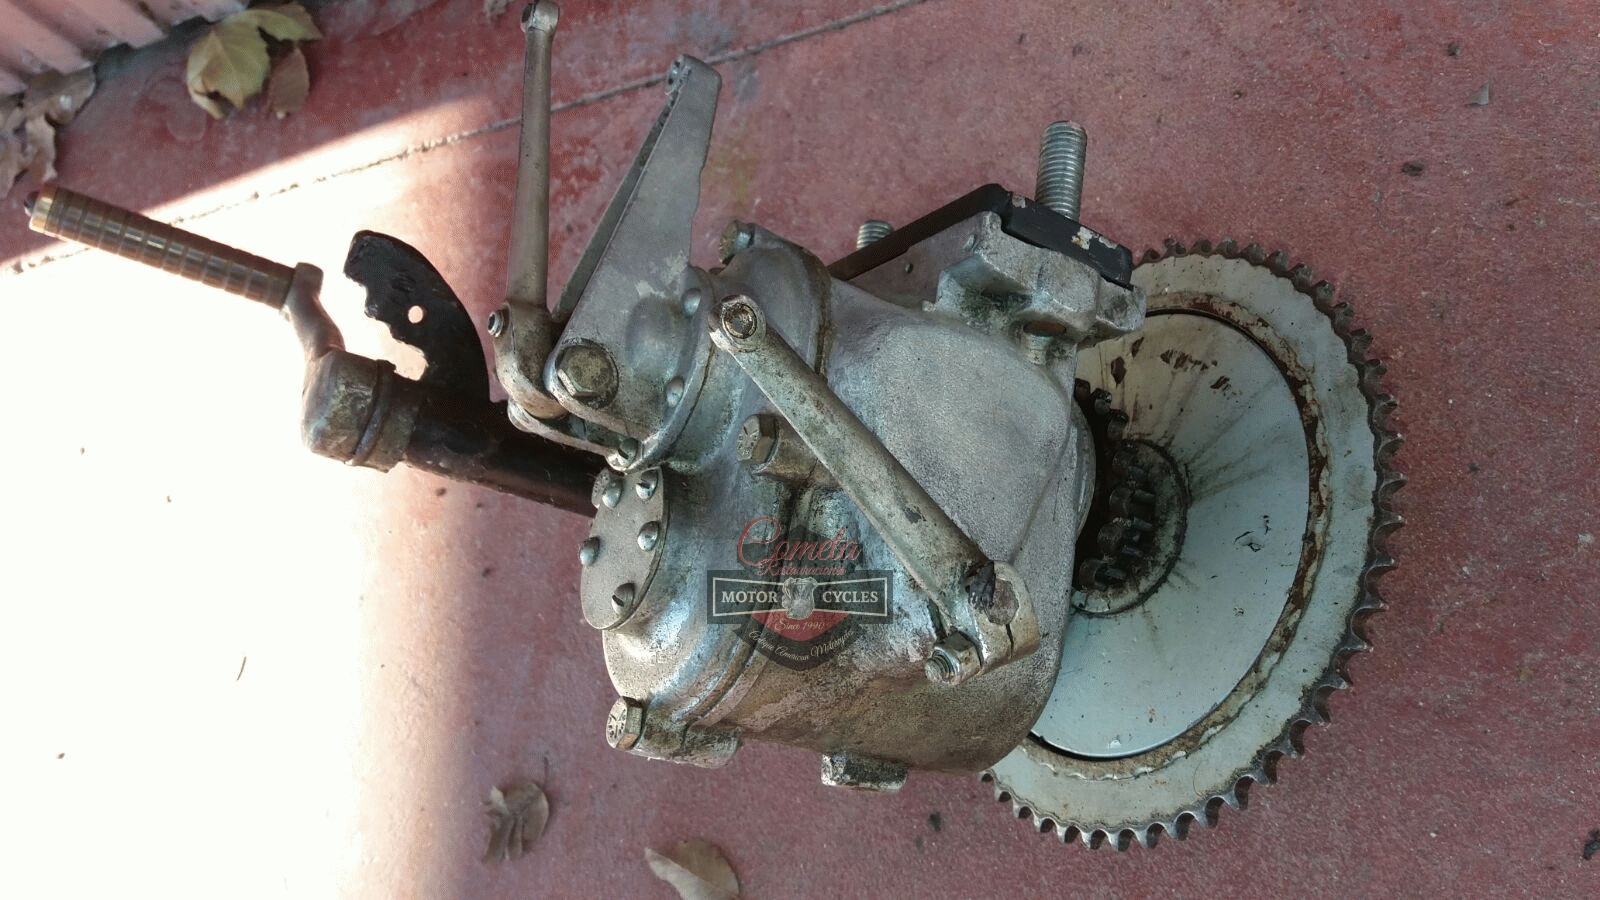 CAJA DE CAMBIOS AJS 500cc  SV OHV OHC M10 R10 S10 AÑOS 1927 A 1931 GEARBOX AJS  HEAVY WEIGHT !